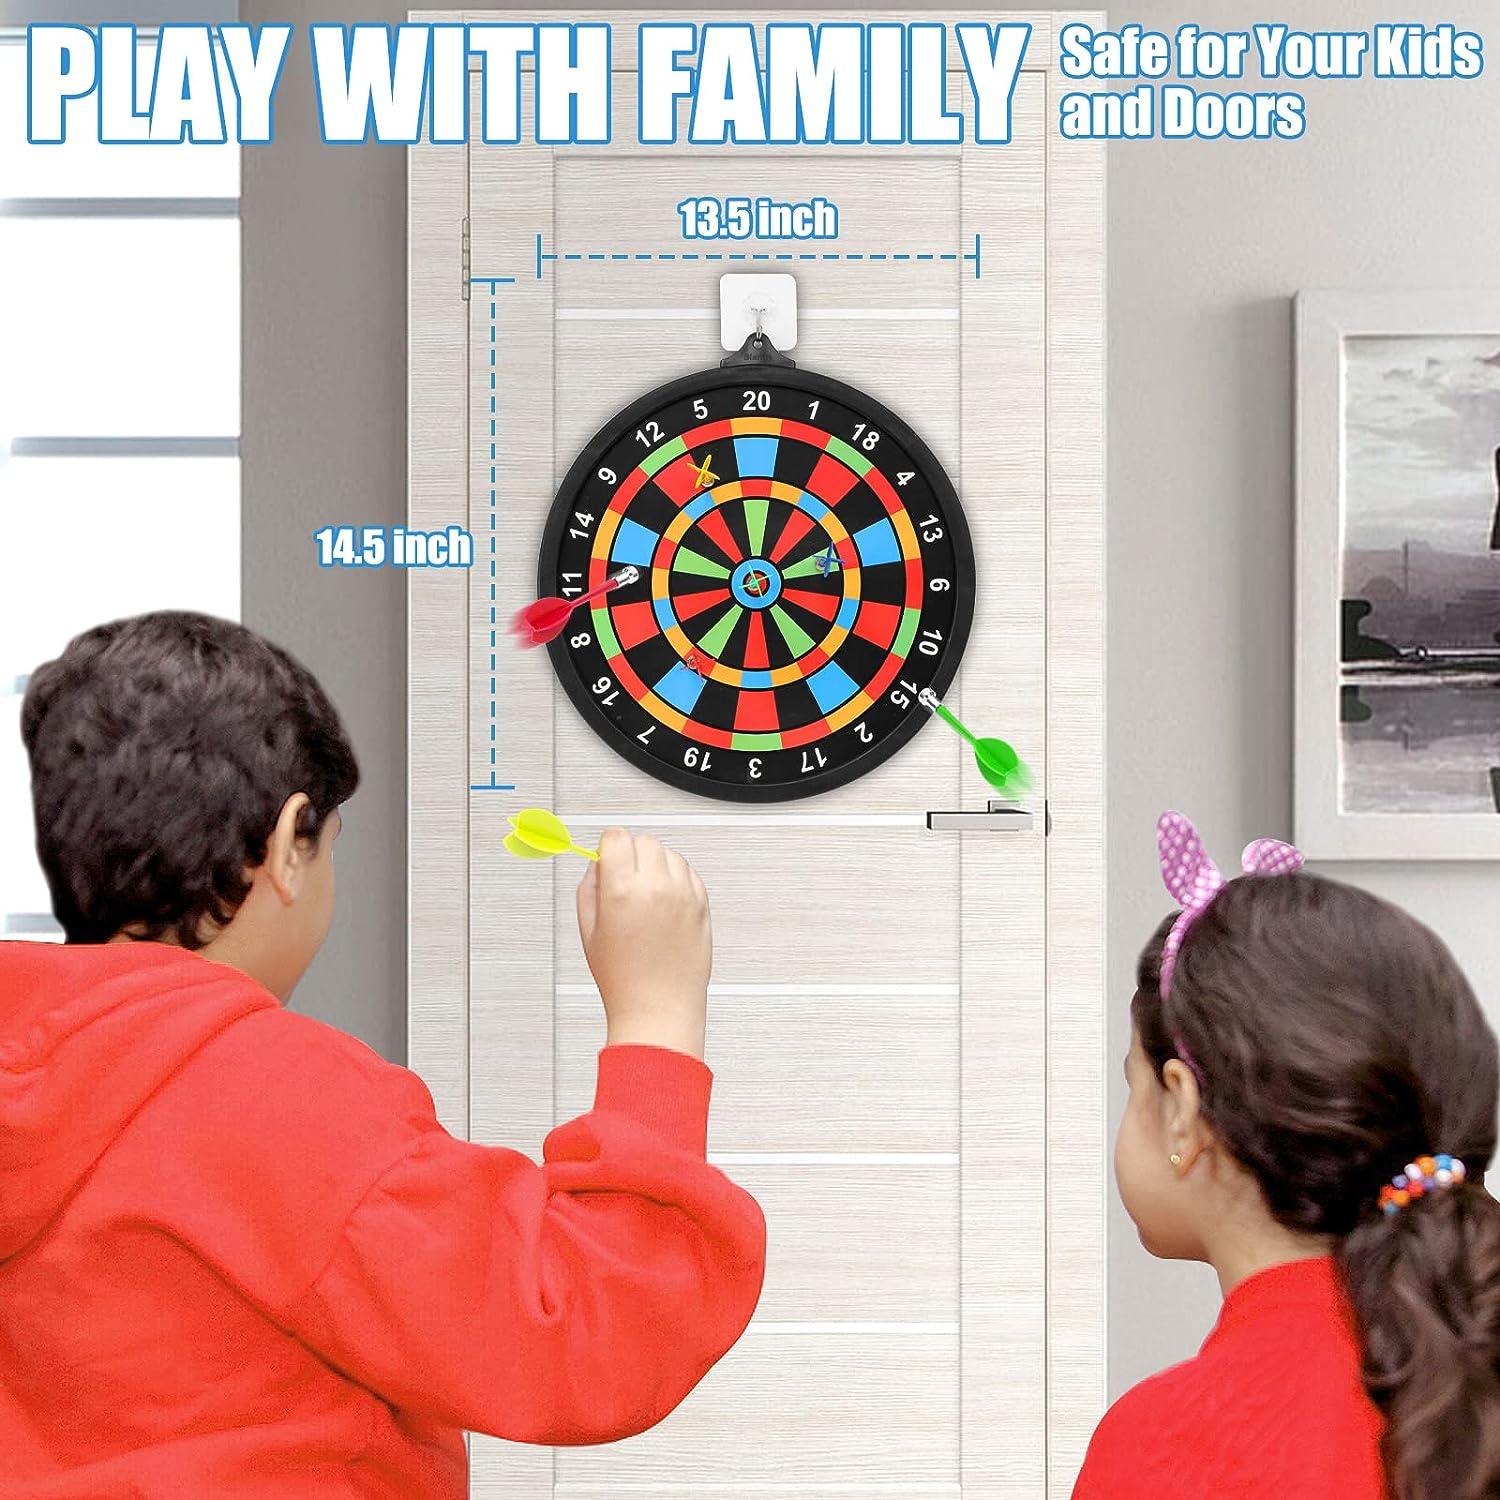 How To Set Up a Dartboard at Home - Mommy Kat and Kids